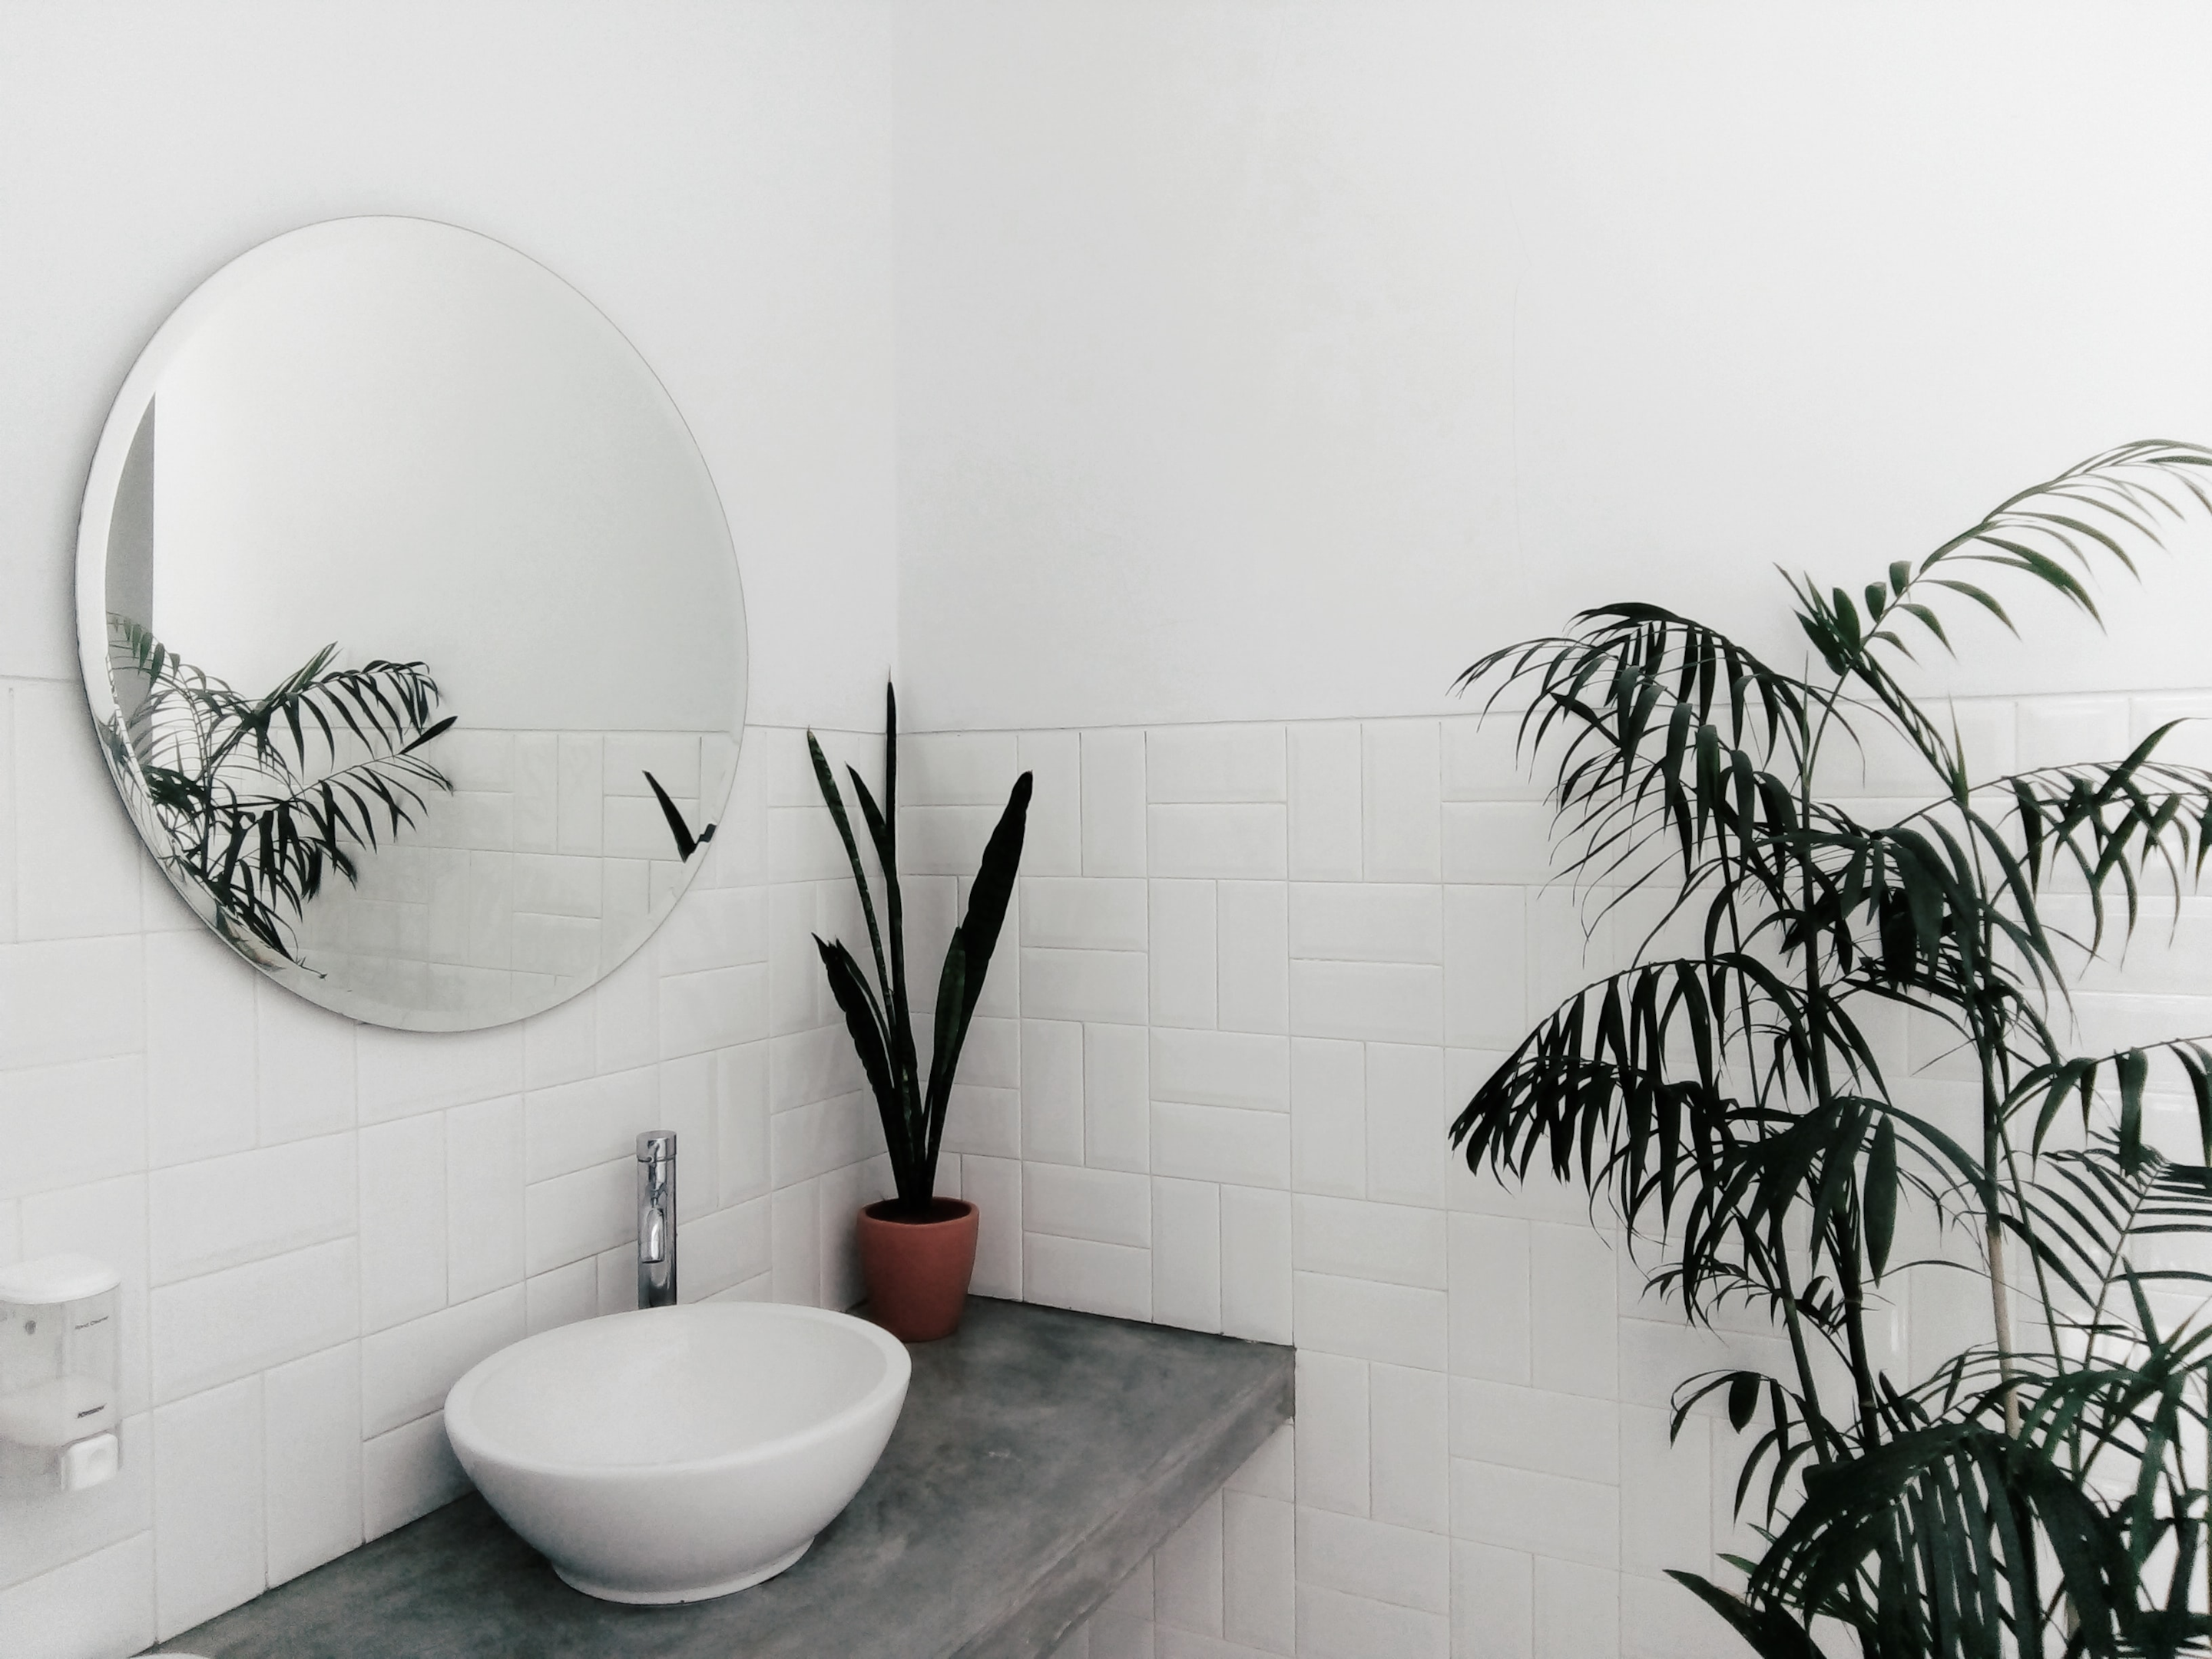 An white color scheme exudes simplicity and luxury. (Photo from Unsplash) | Image Link: https://images.unsplash.com/photo-1552454799-ca5cfdc612c8?ixlib=rb-1.2.1&ixid=MnwxMjA3fDB8MHxwaG90by1wYWdlfHx8fGVufDB8fHx8&auto=format&fit=crop&w=774&q=80